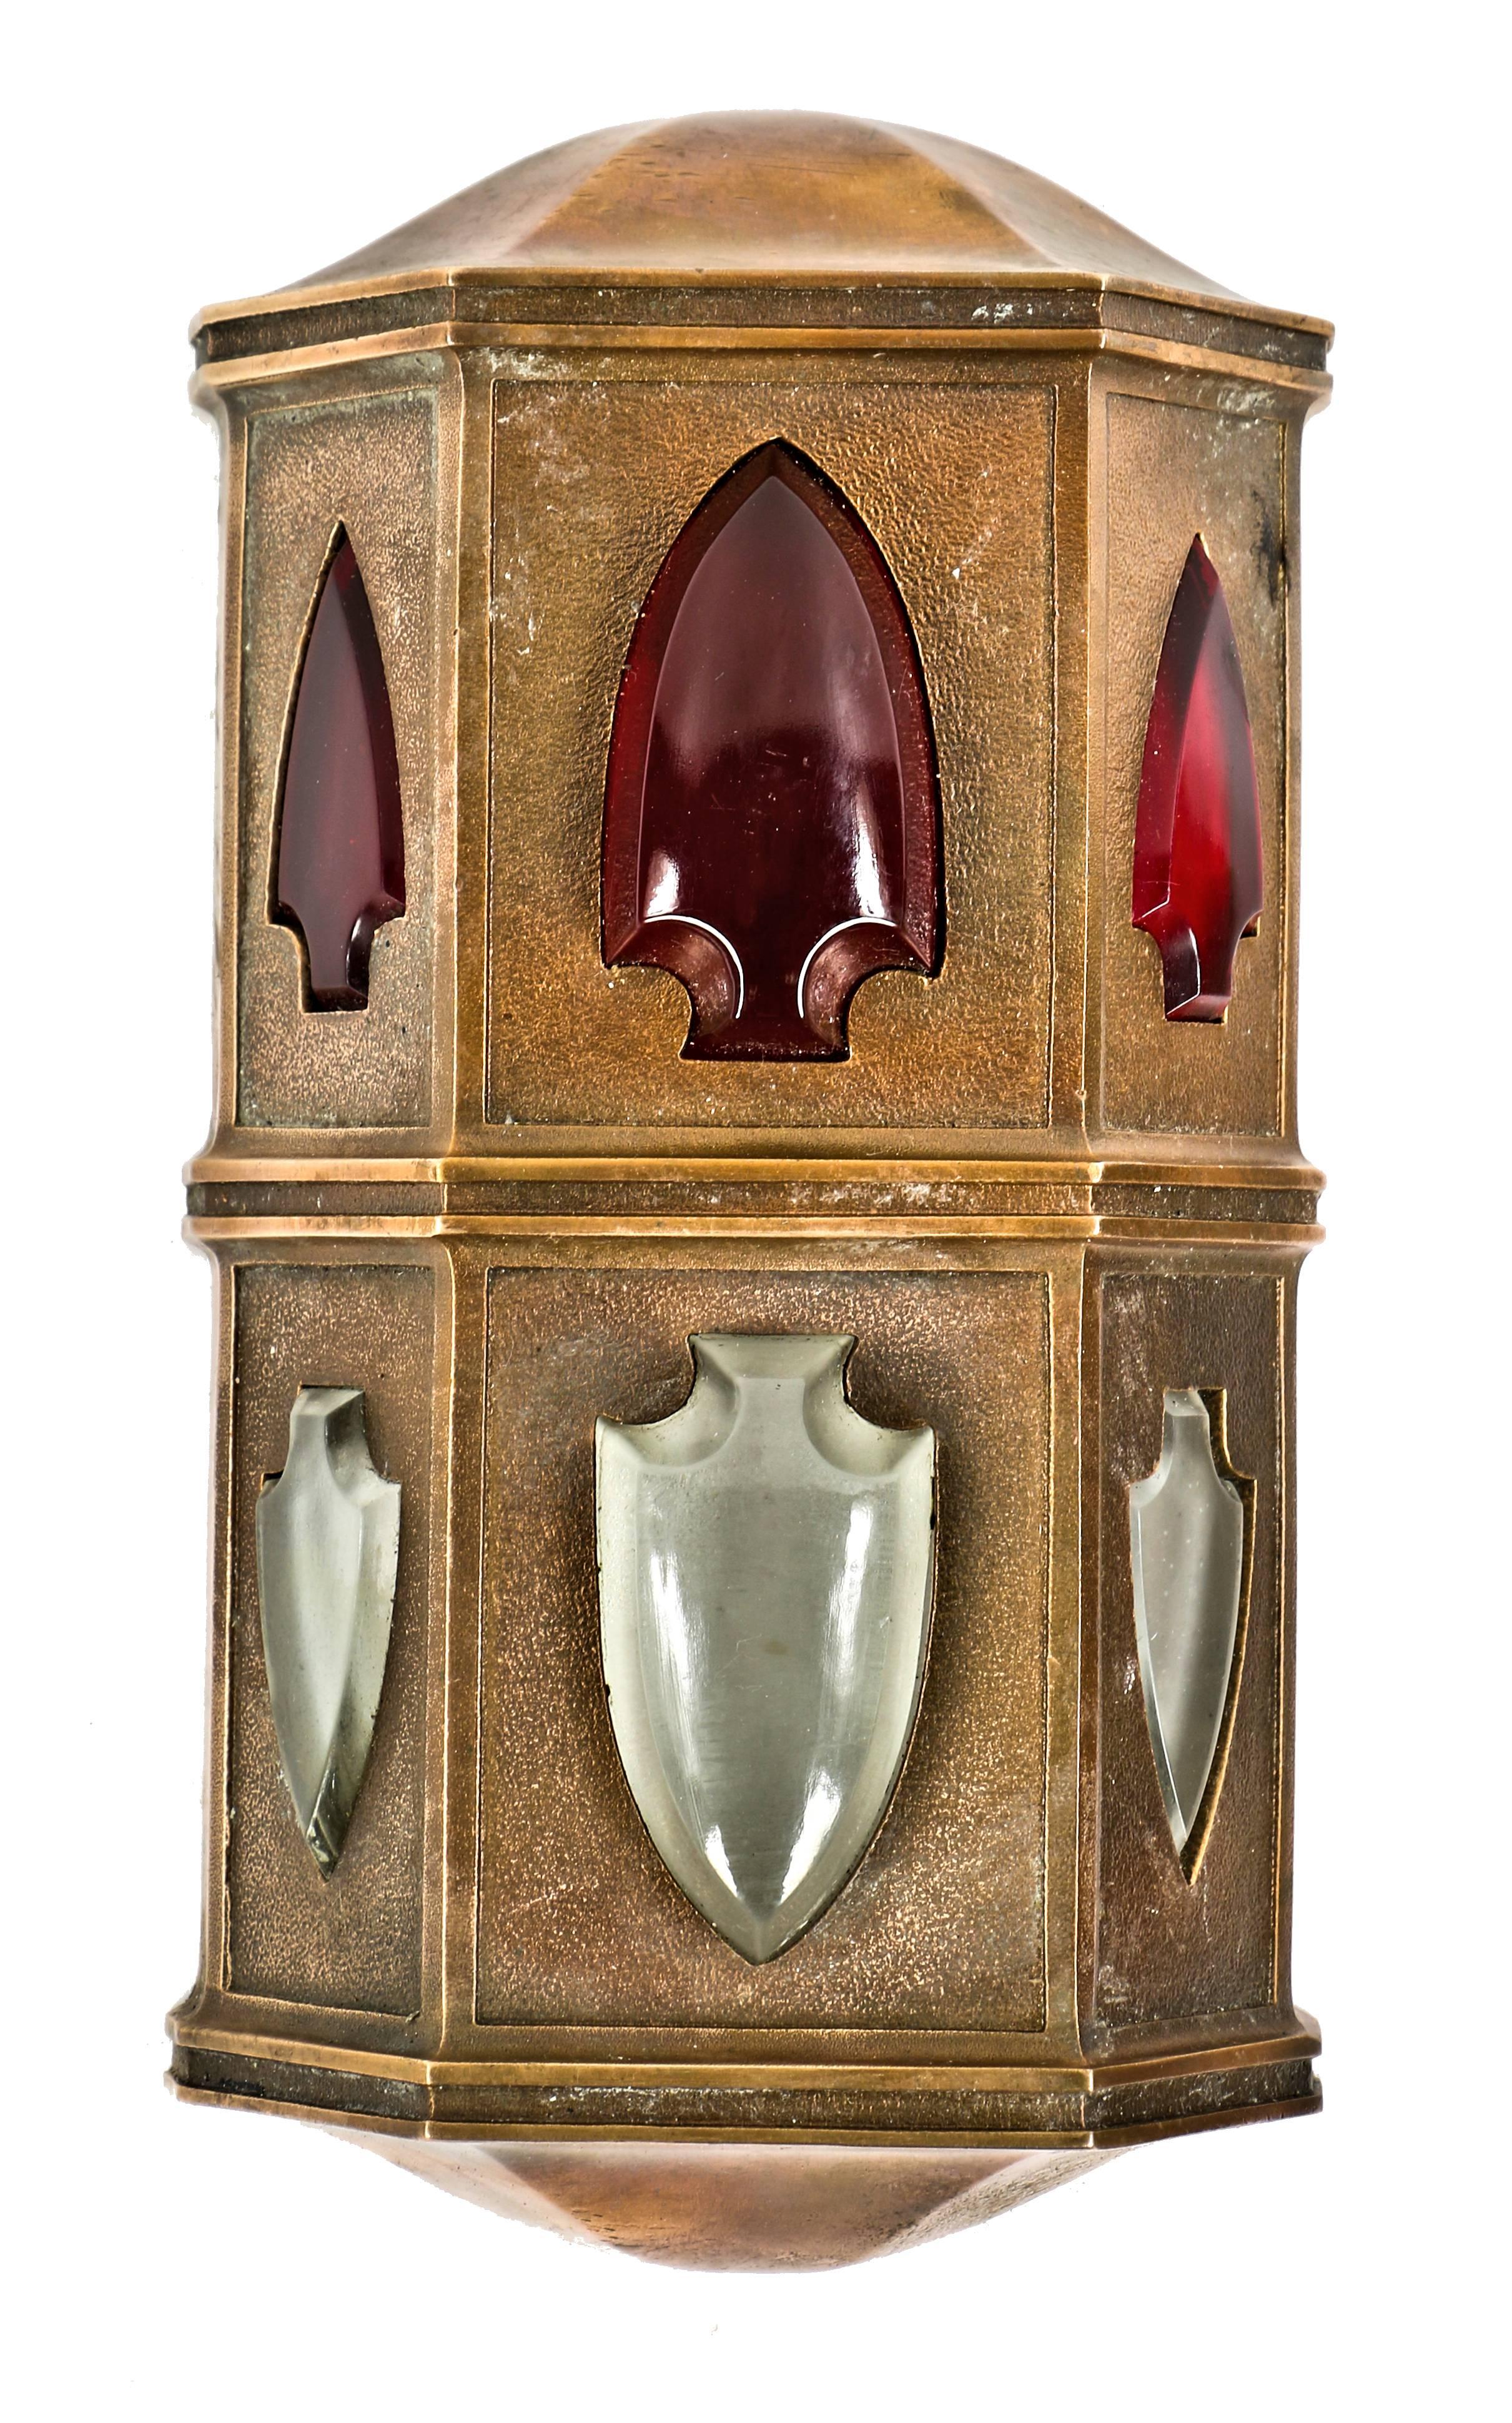 One of the few remaining late 1920s all original antique American wall-mount ornamental cast bronze multi-faceted elevator indicators or 